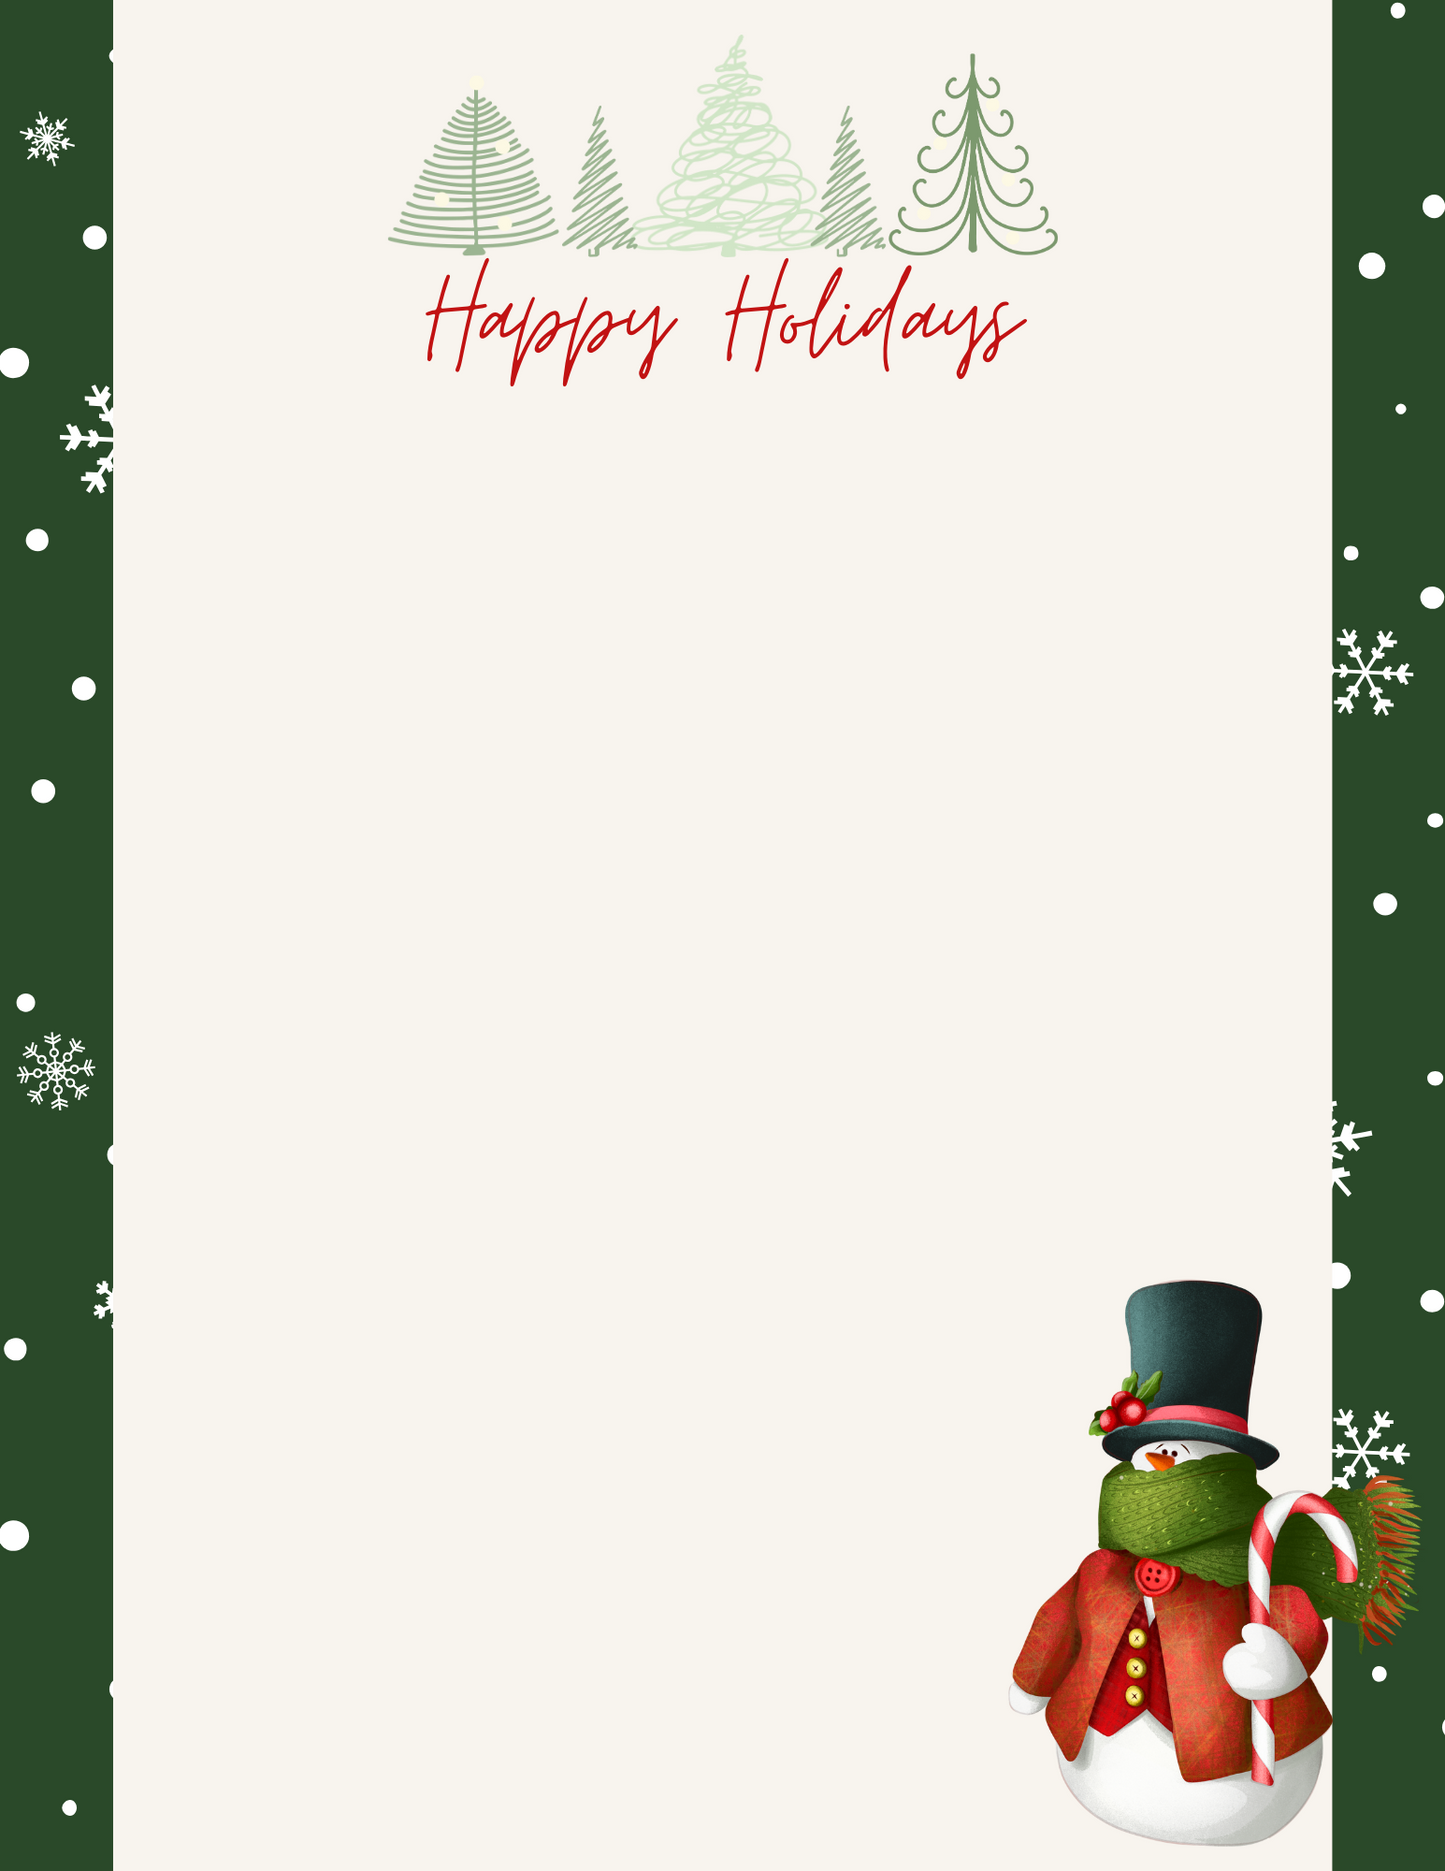 Happy Holidays with Snowman - Letter